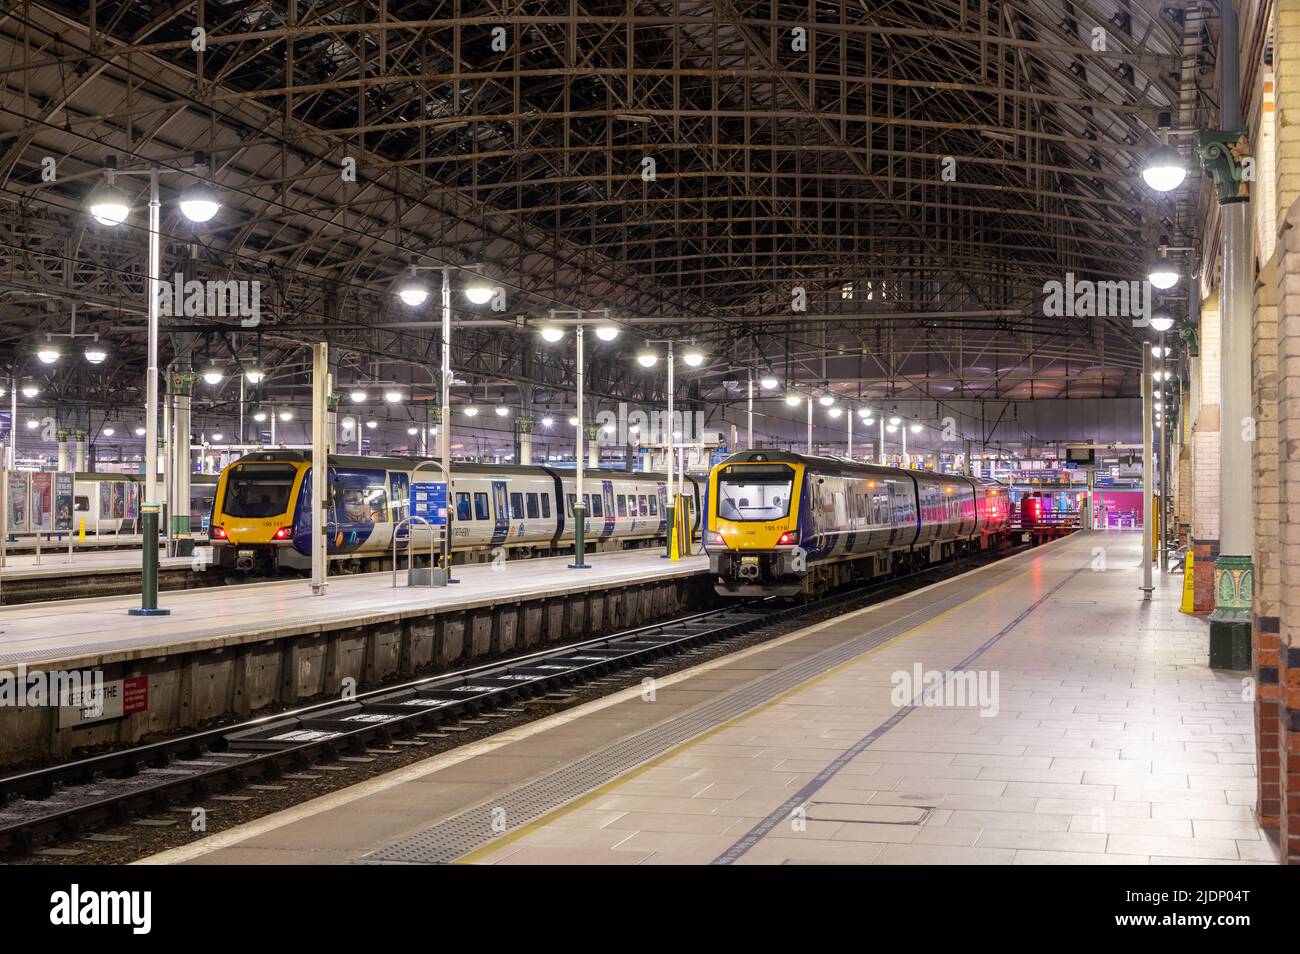 Northern 195113, 195119 , Manchester Piccadilly. UK. 23rd April 20222 Stock Photo